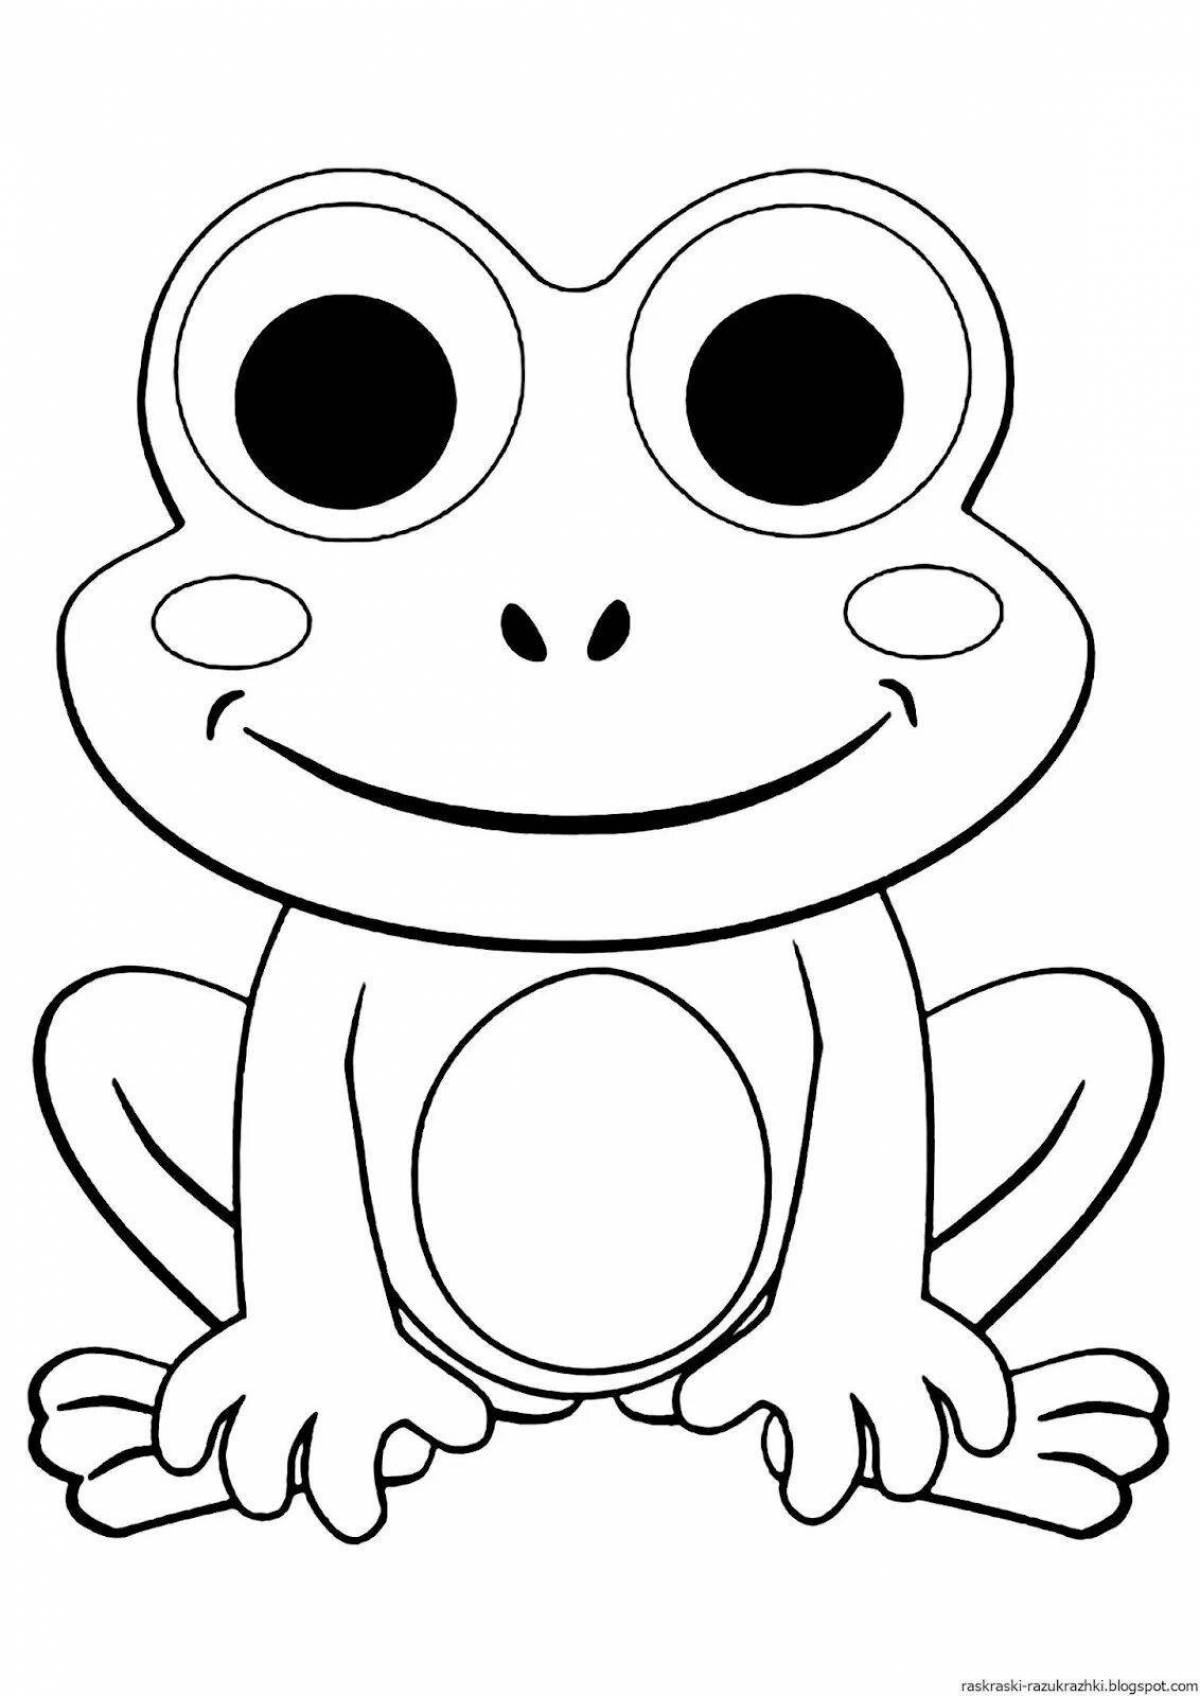 Coloring page of happy cute frog